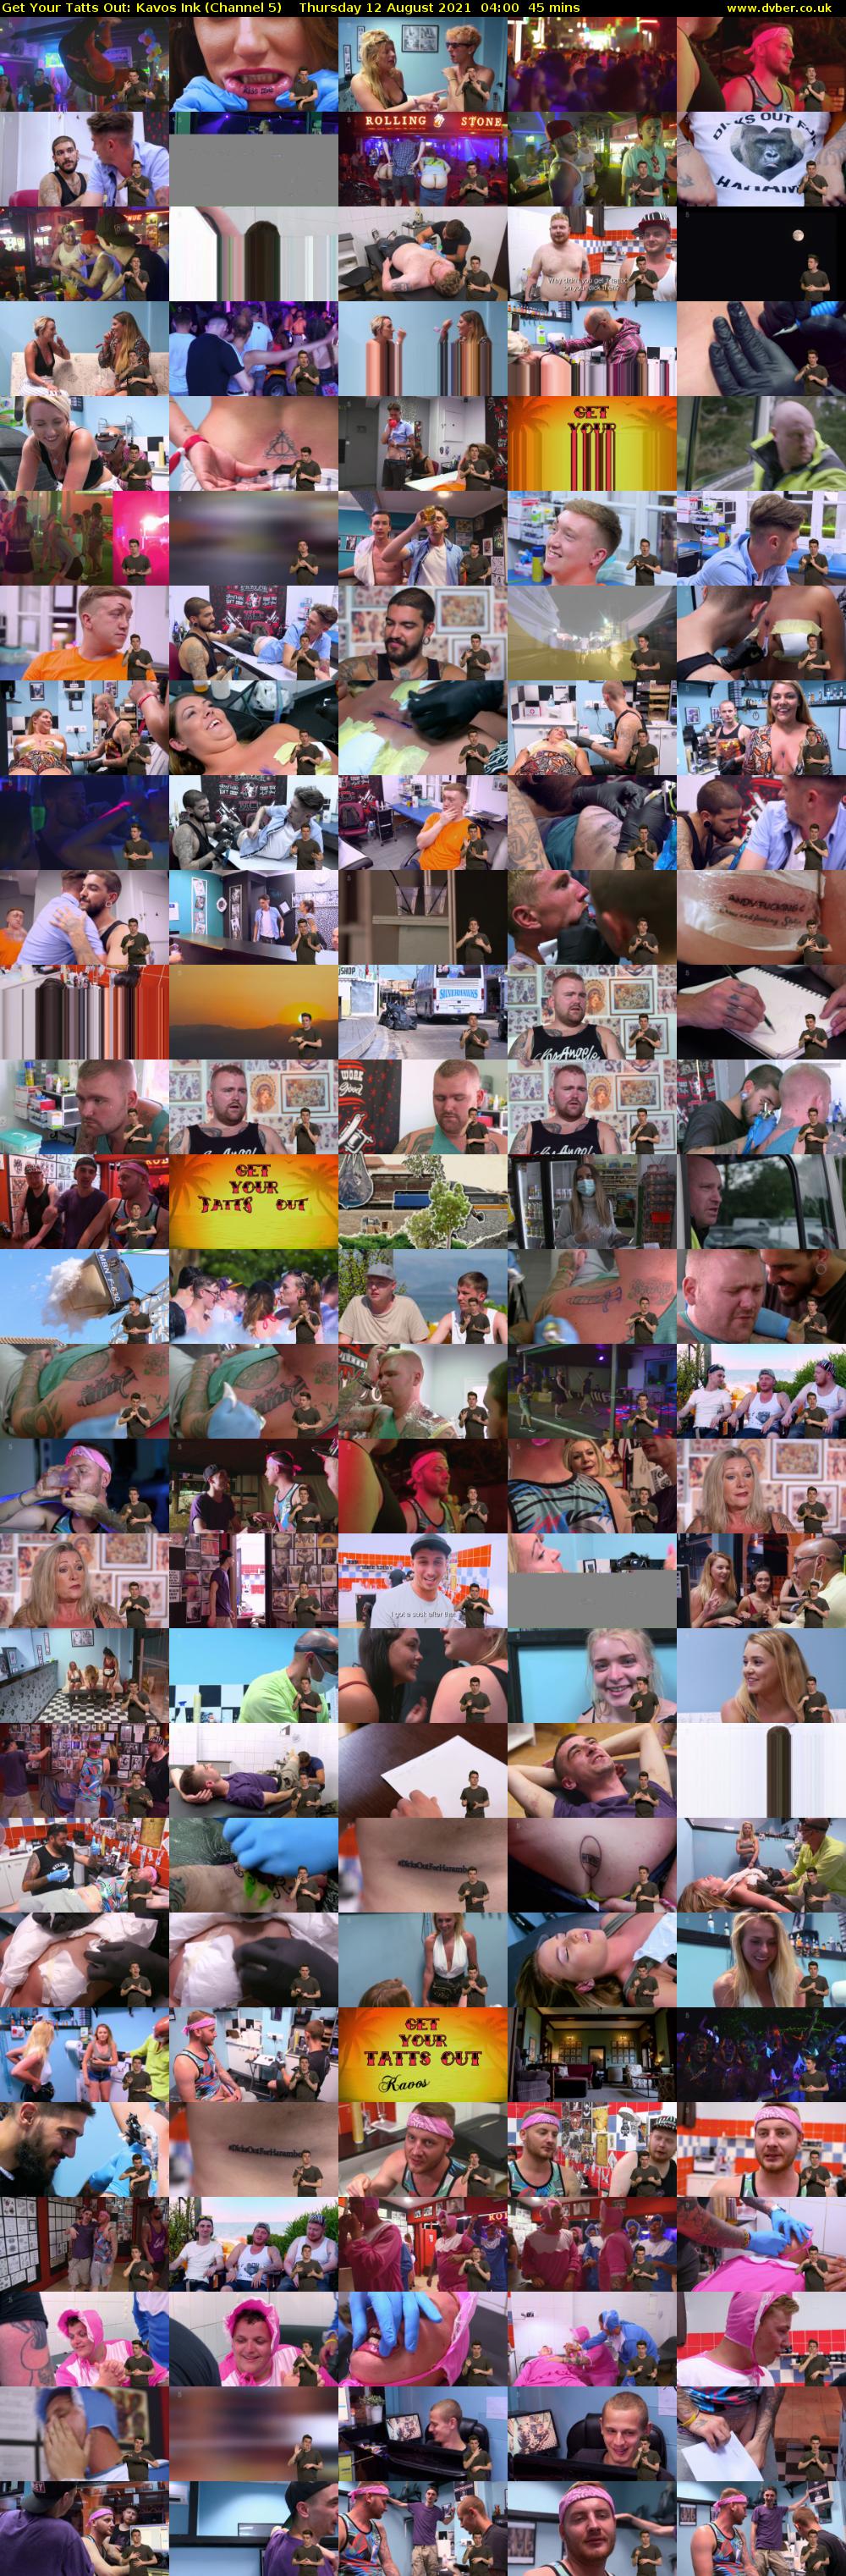 Get Your Tatts Out: Kavos Ink (Channel 5) Thursday 12 August 2021 04:00 - 04:45